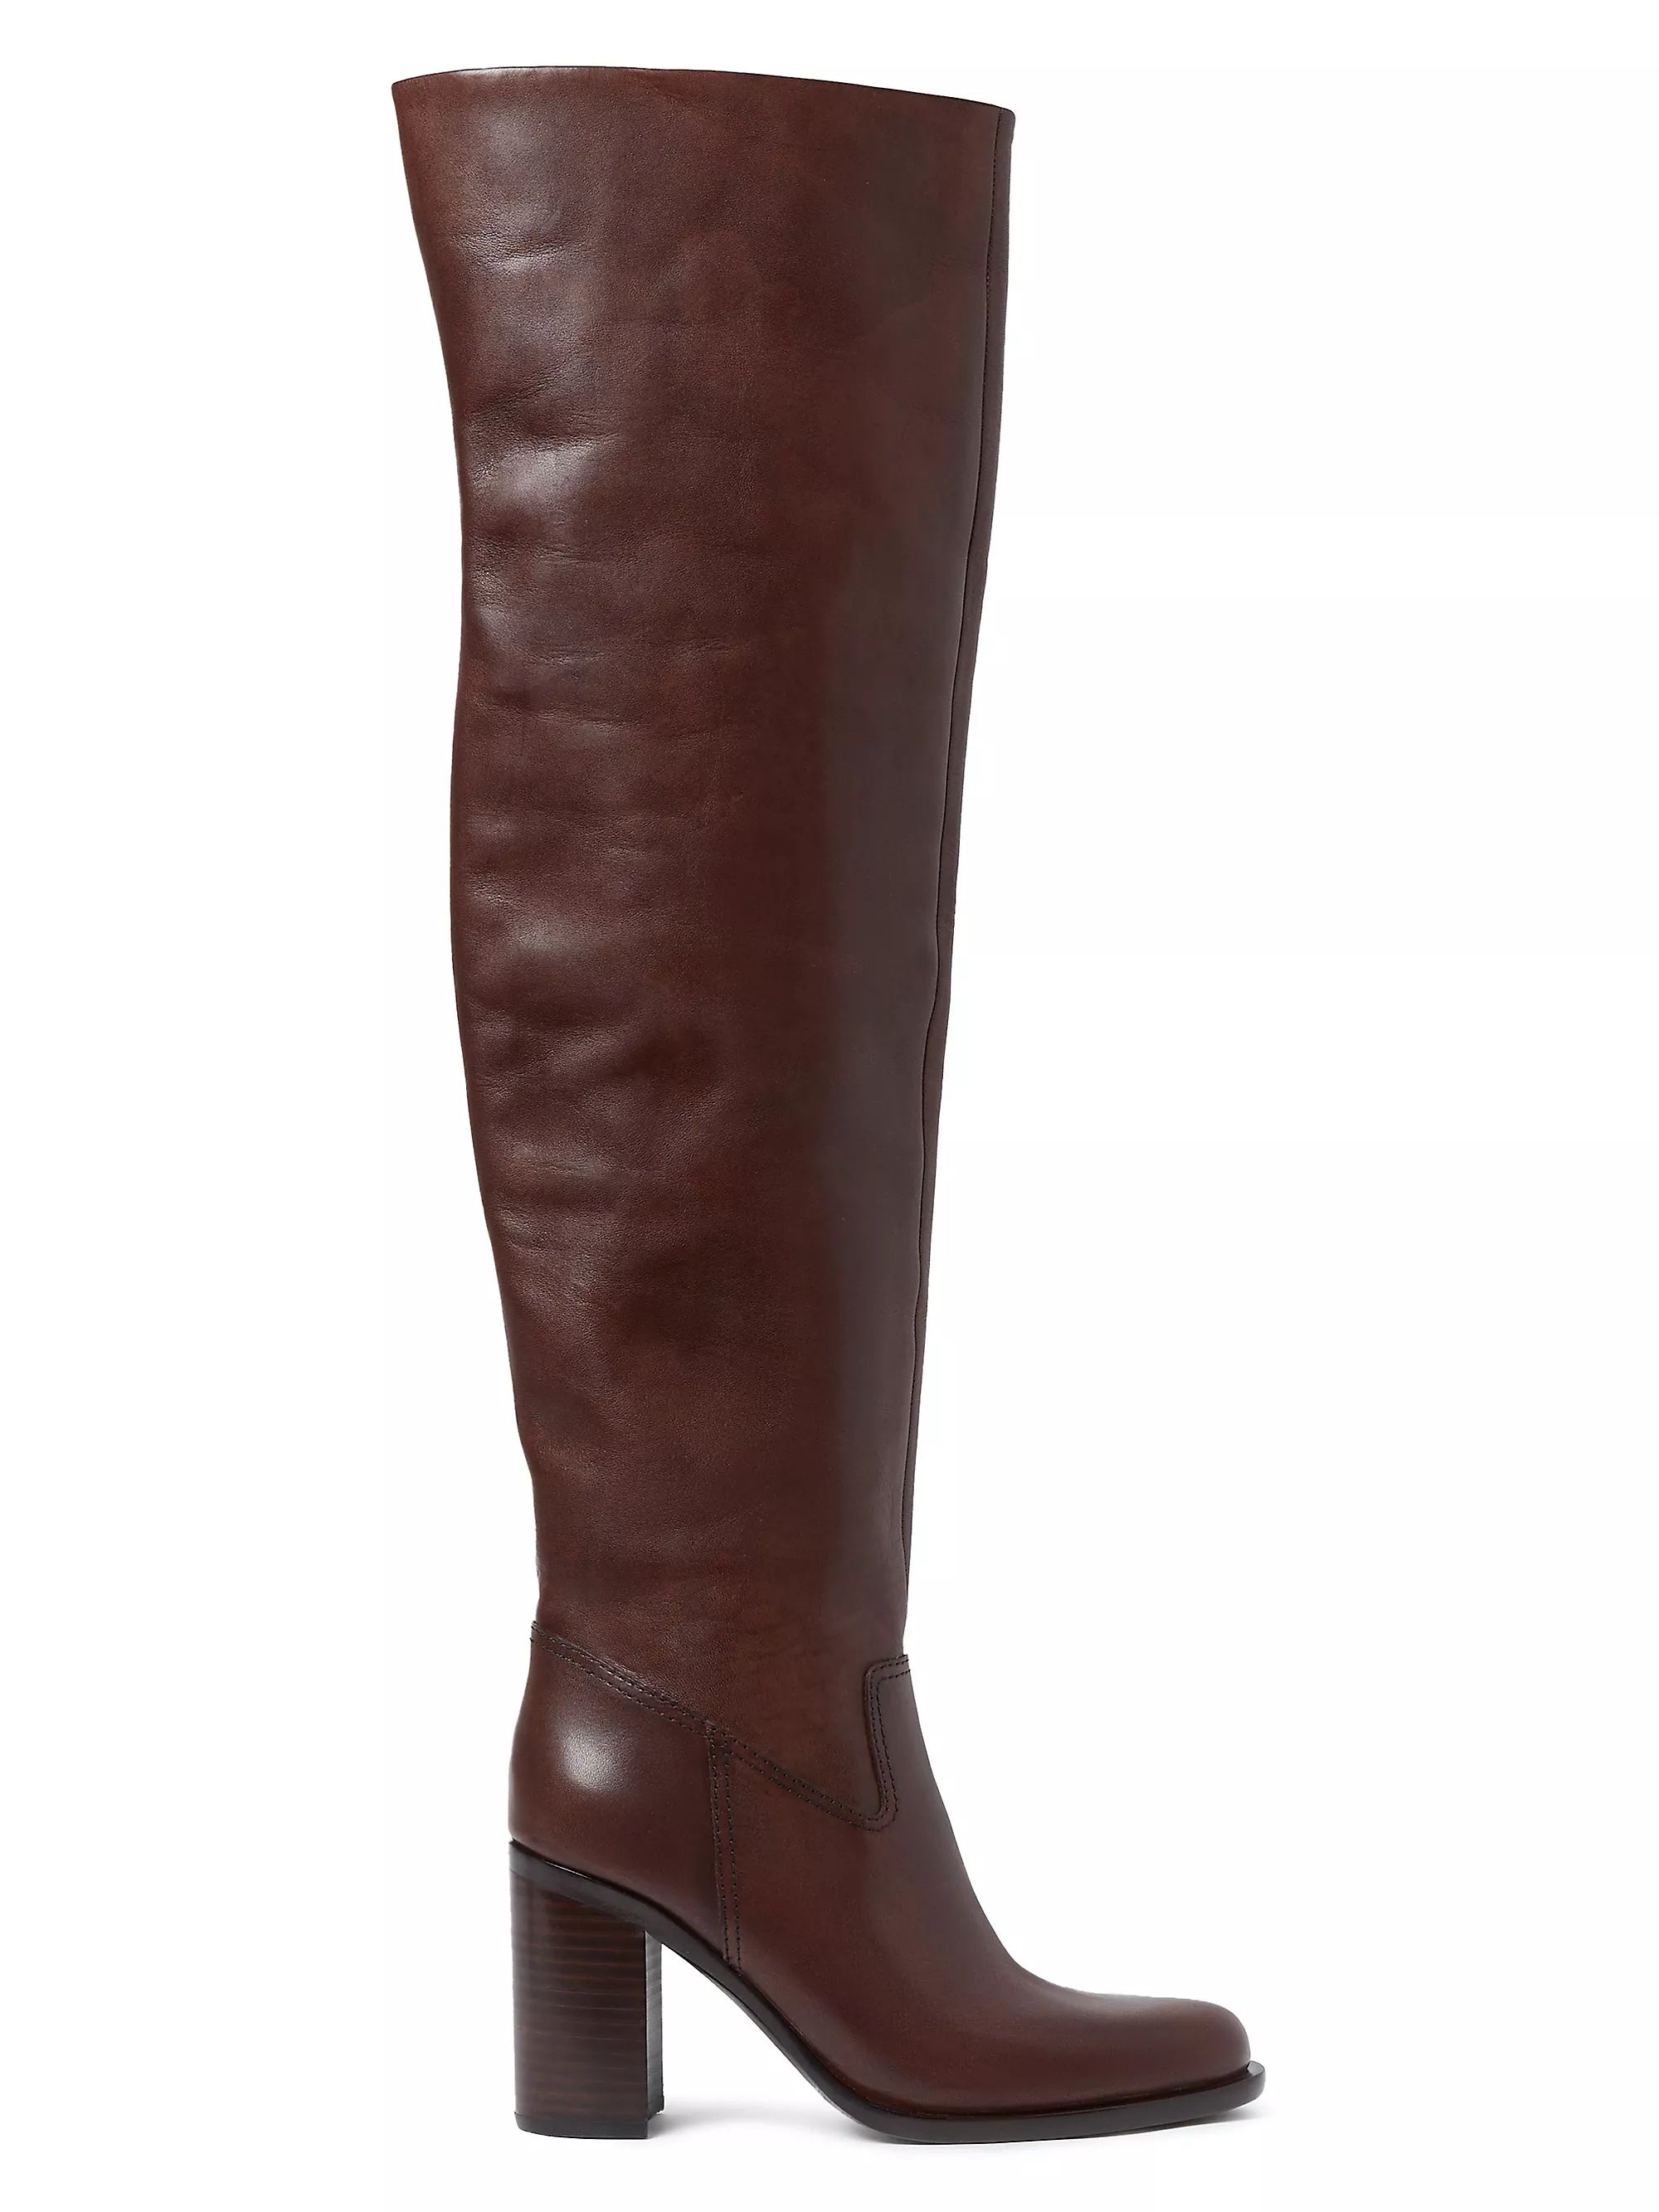 Deidre 85MM Leather Over-The-Knee Boots | Saks Fifth Avenue